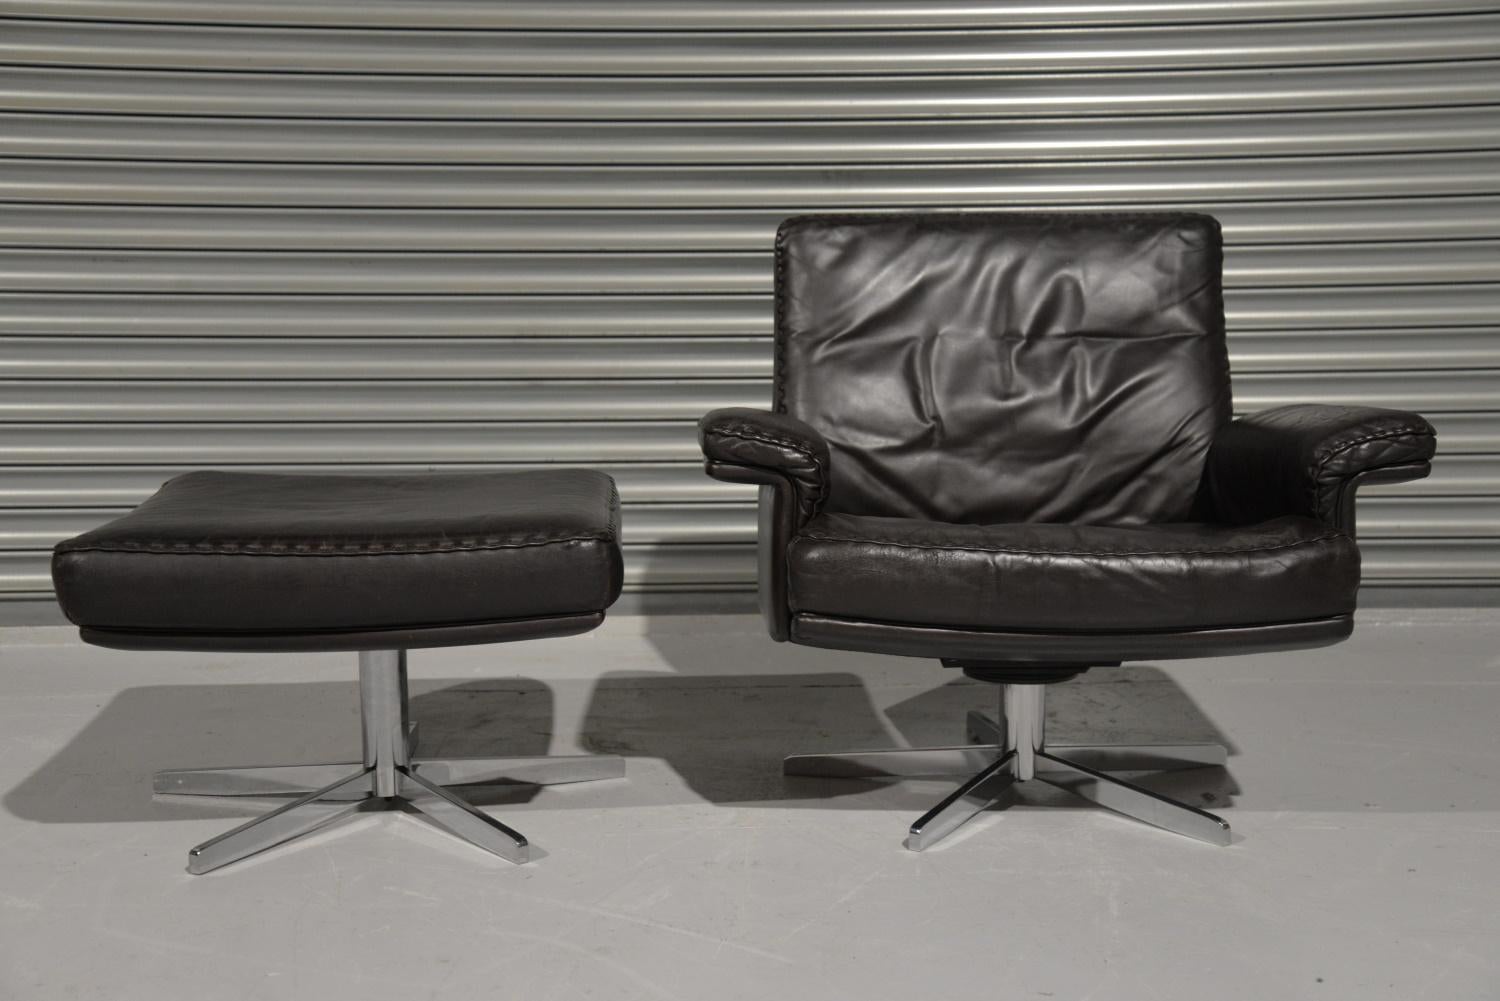 Discounted airfreight for our US and International customers (from 2 weeks door to door)

We are delighted to bring to you an ultra-rare and highly desirable De Sede DS 35 swivel leather armchair and ottoman. Hand built in the 1970s by De Sede